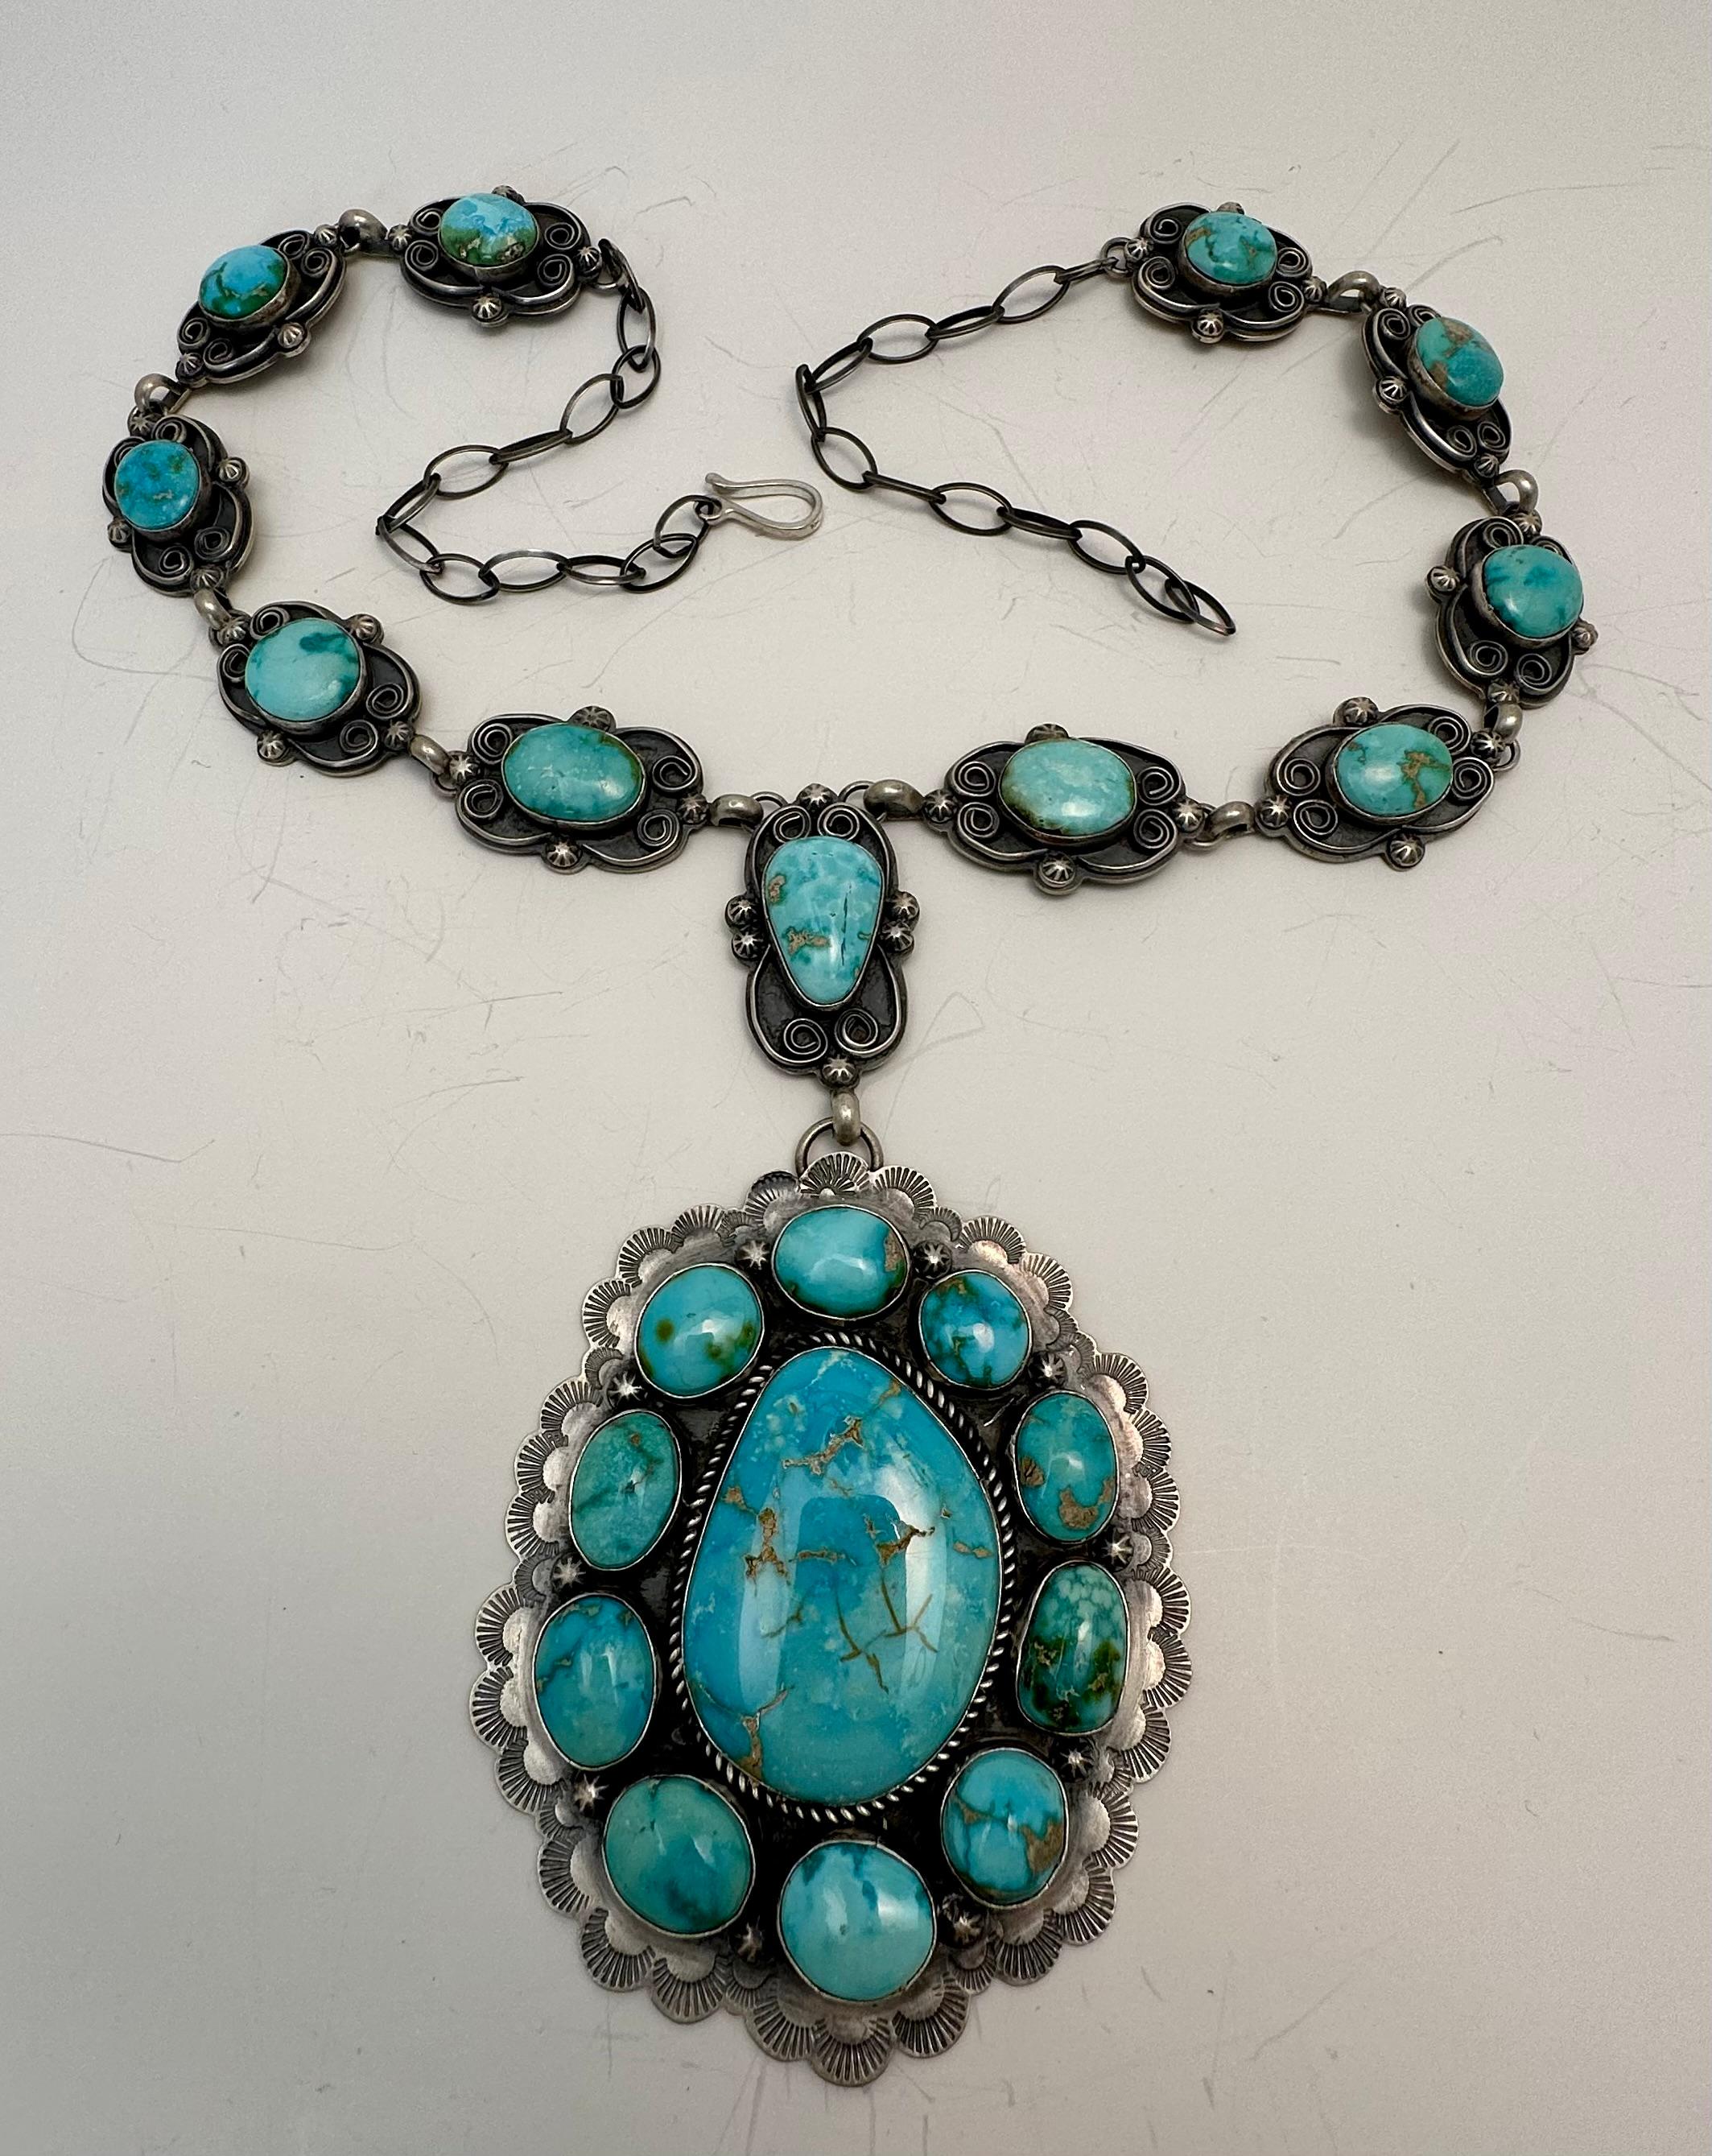 Navajo argent sterling .925 Sleeping Beauty Turquoise 30